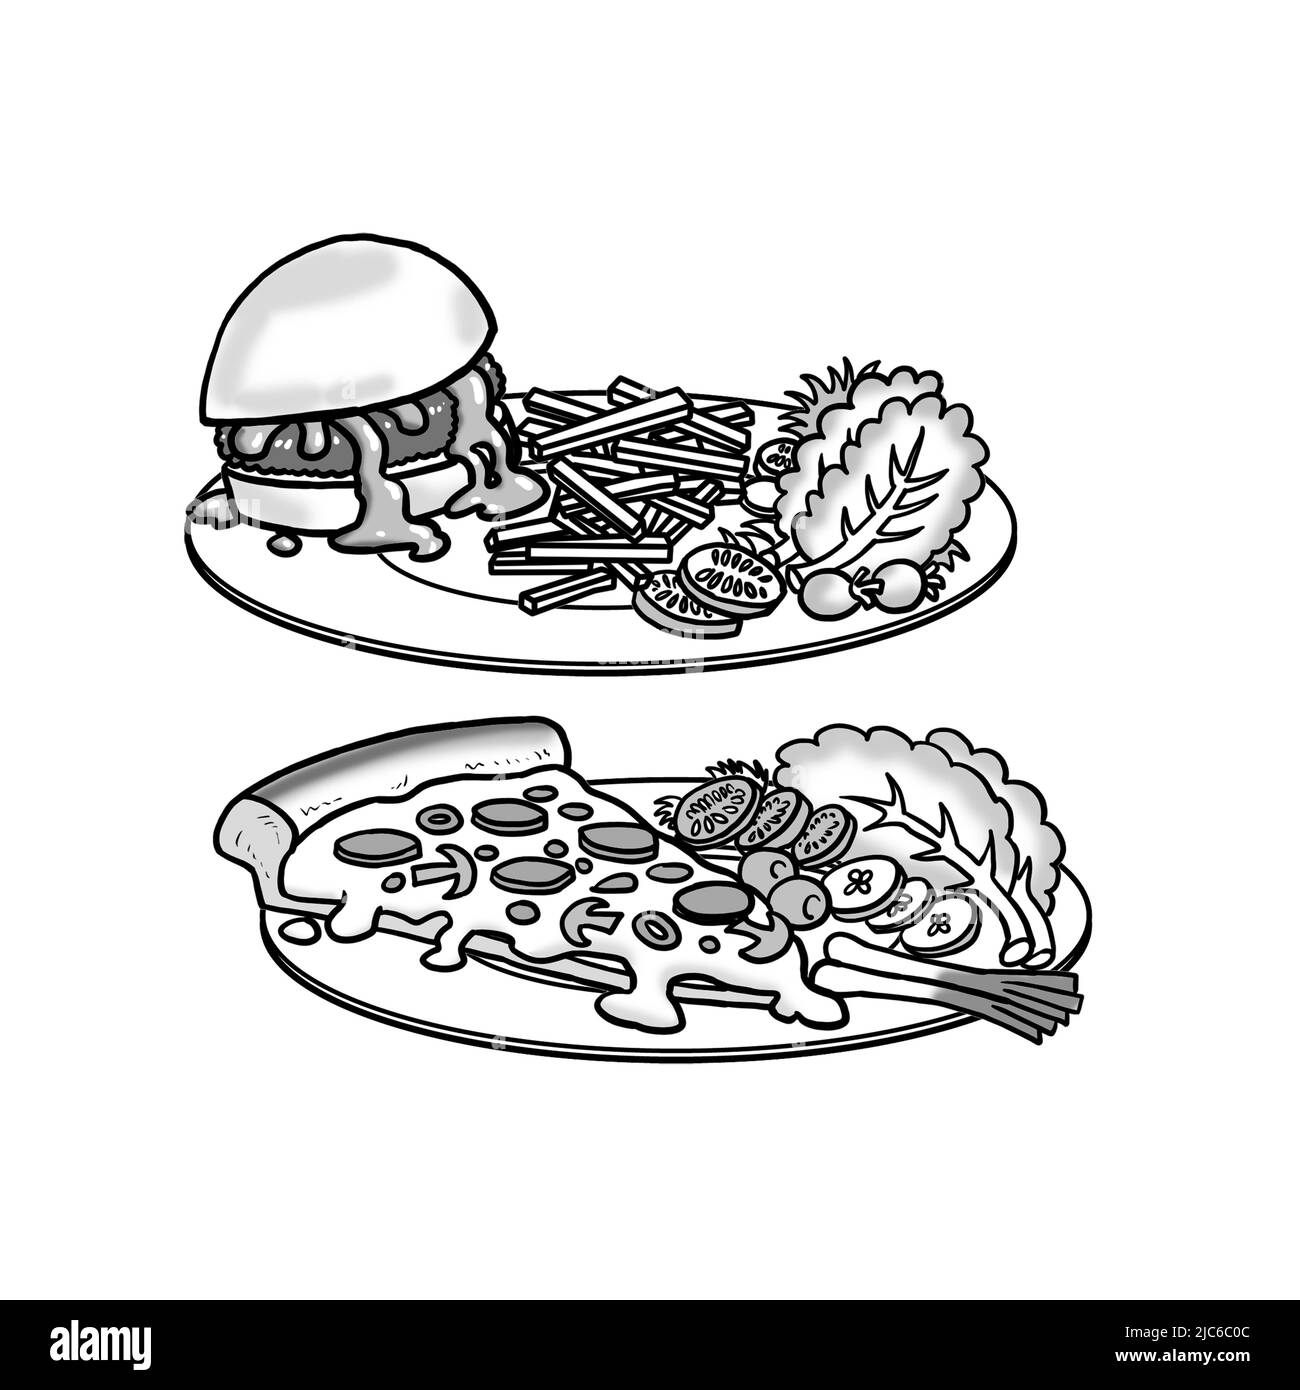 Black and white art illustration of two plates of food, burger, chips and salad, slice of pizza and salad, suit menu art, colouring in activity sheet Stock Photo